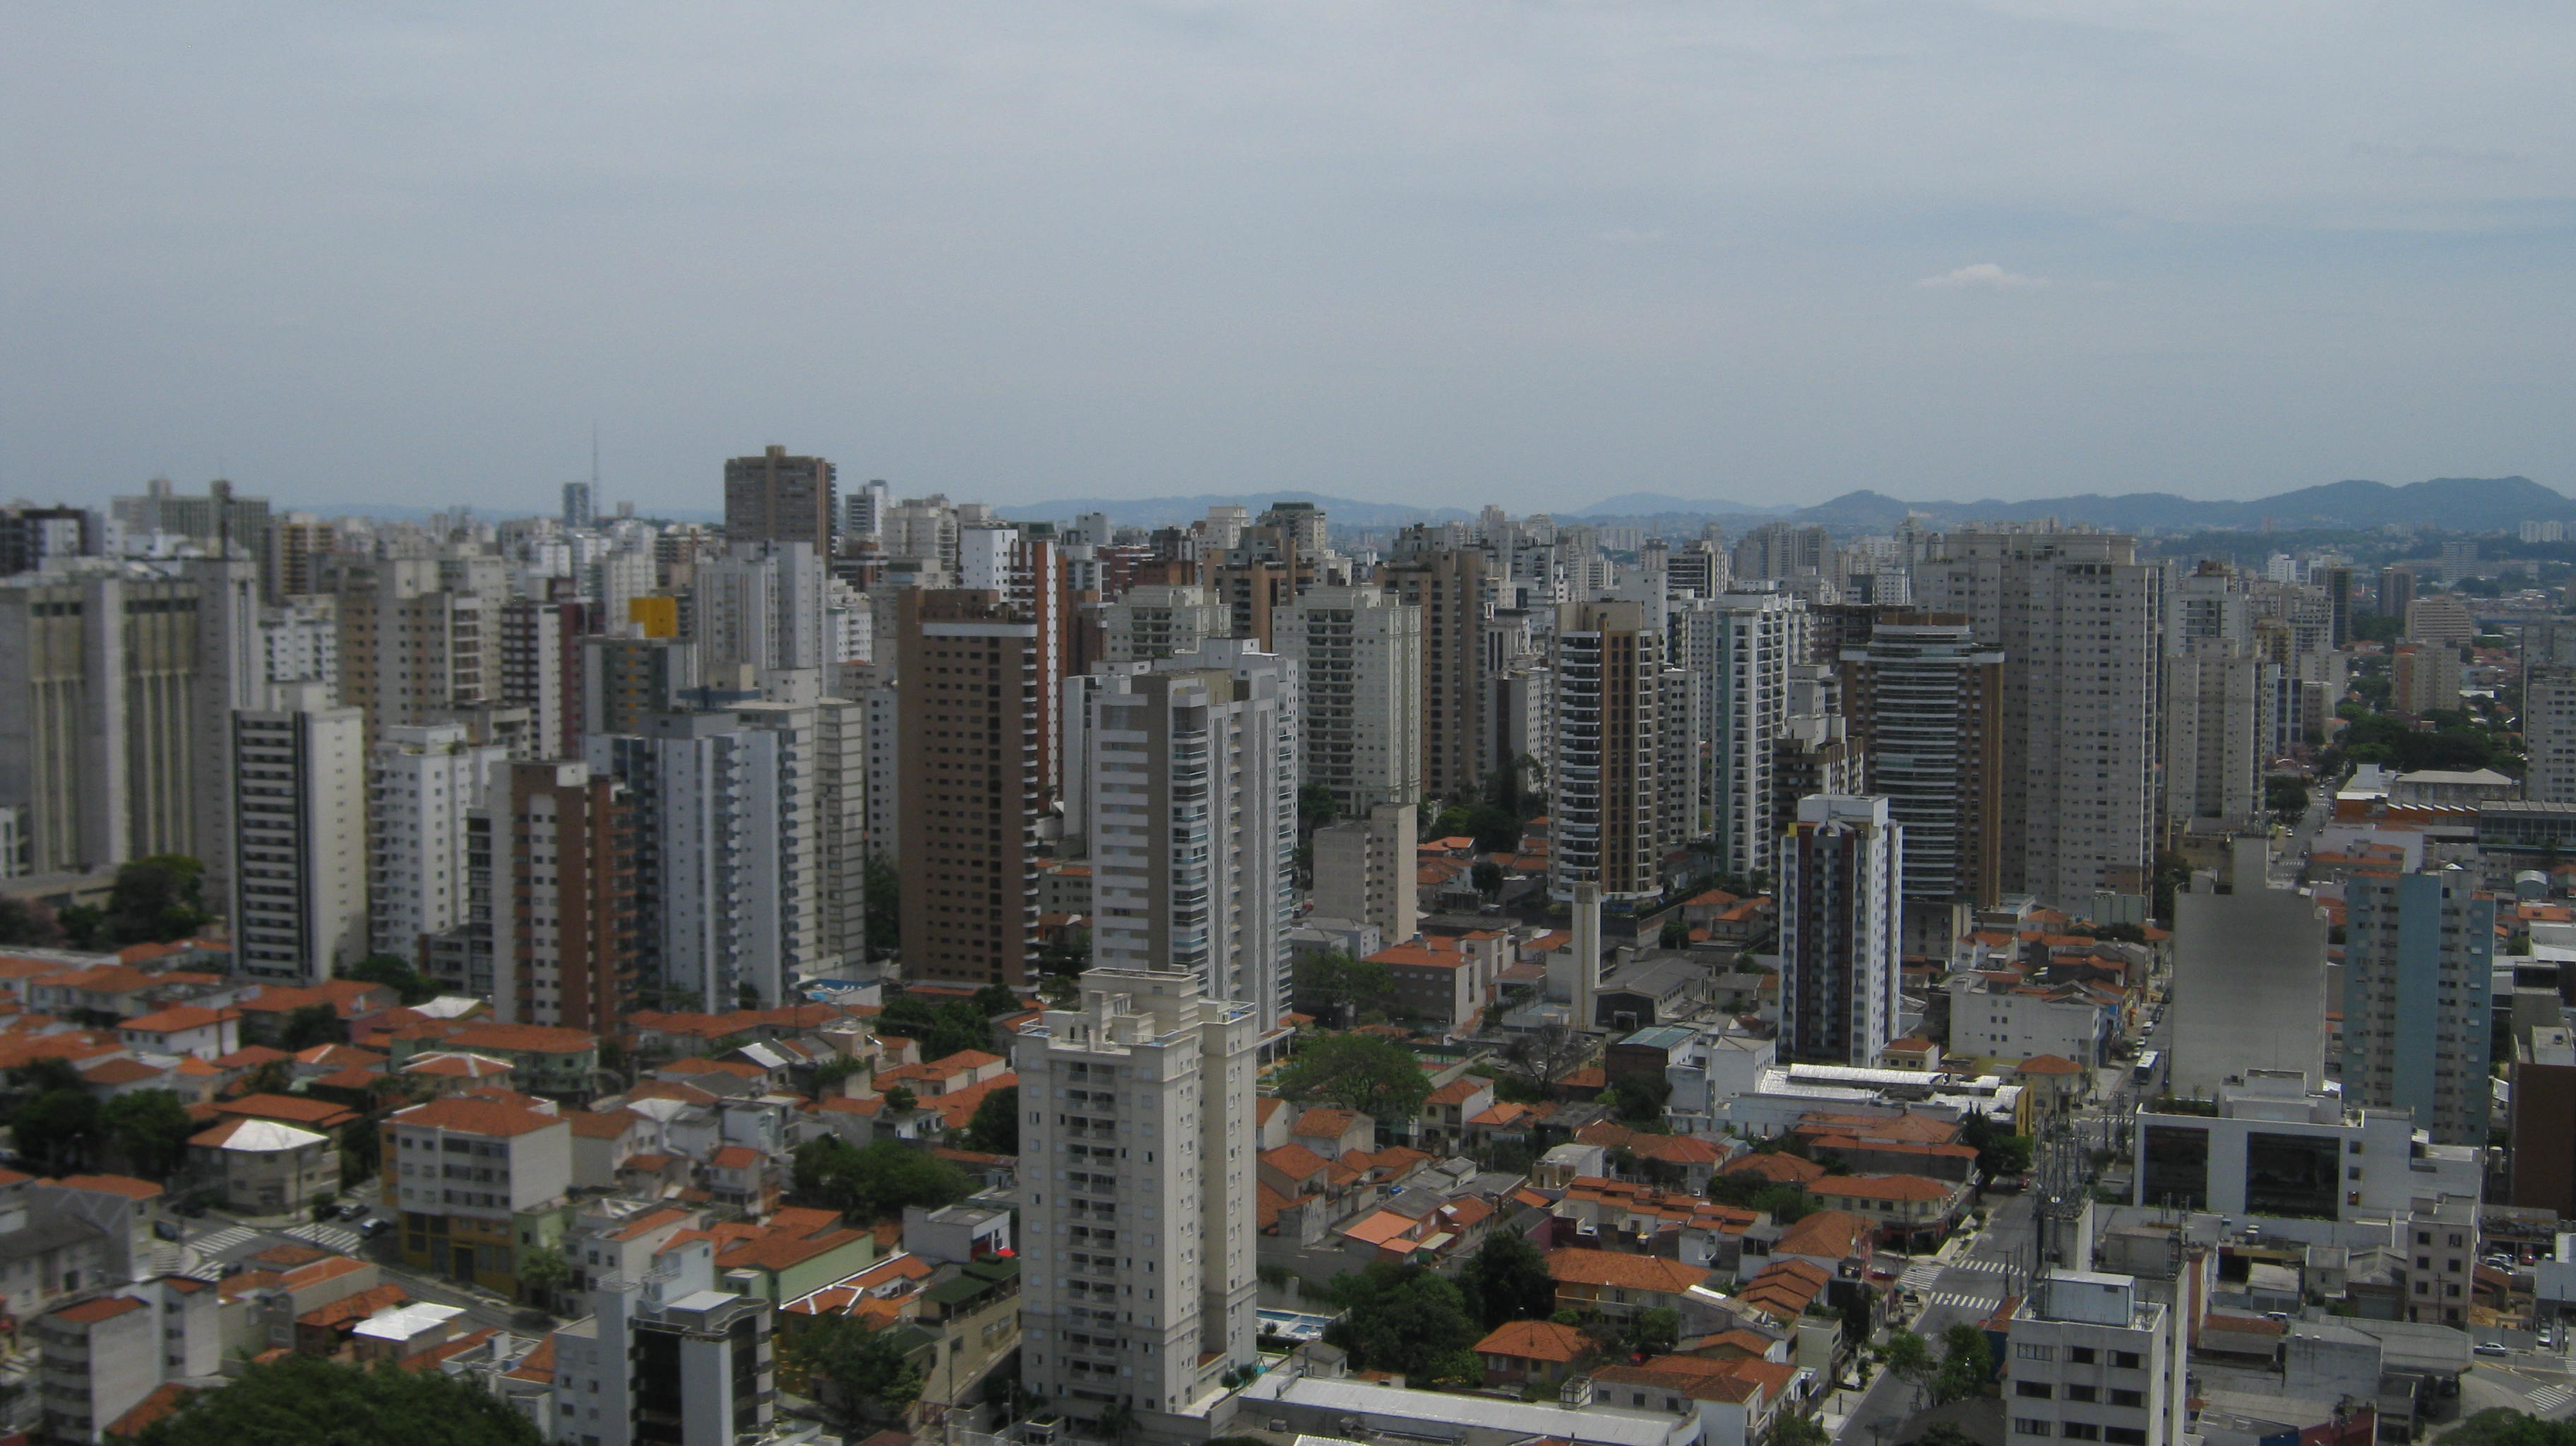 The SDSN wants the sustainability goals to be met by 20130 at the global, regional, national and local levels: highrise housing in São Paulo.